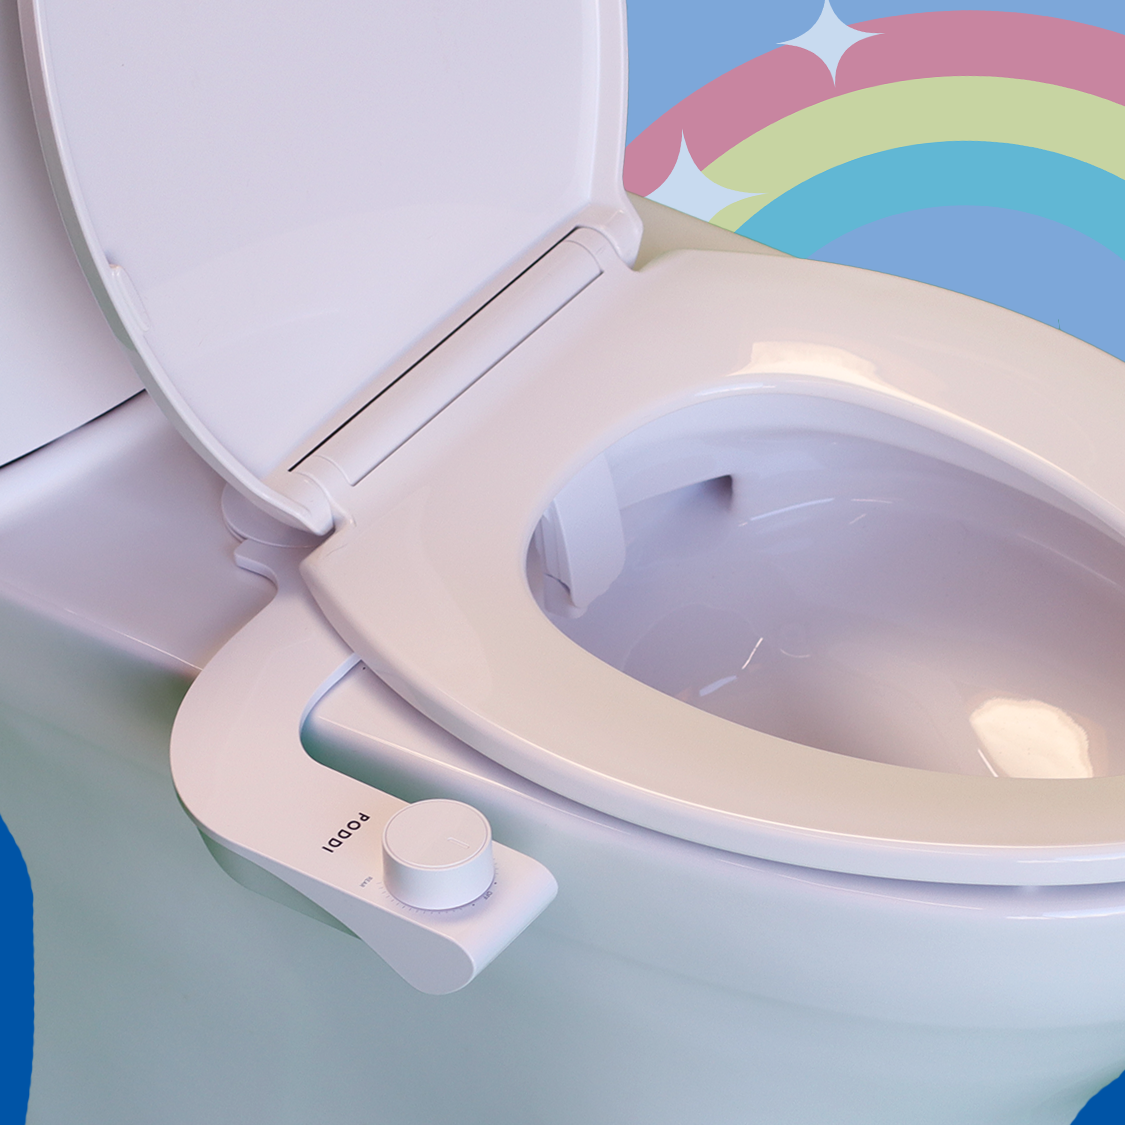 PODDI Clean Wash Bidet attachment with dual nozzle for front & rear wash. Ultra-slim design that fits every standard toilet. Easy to use with one-knob twist.